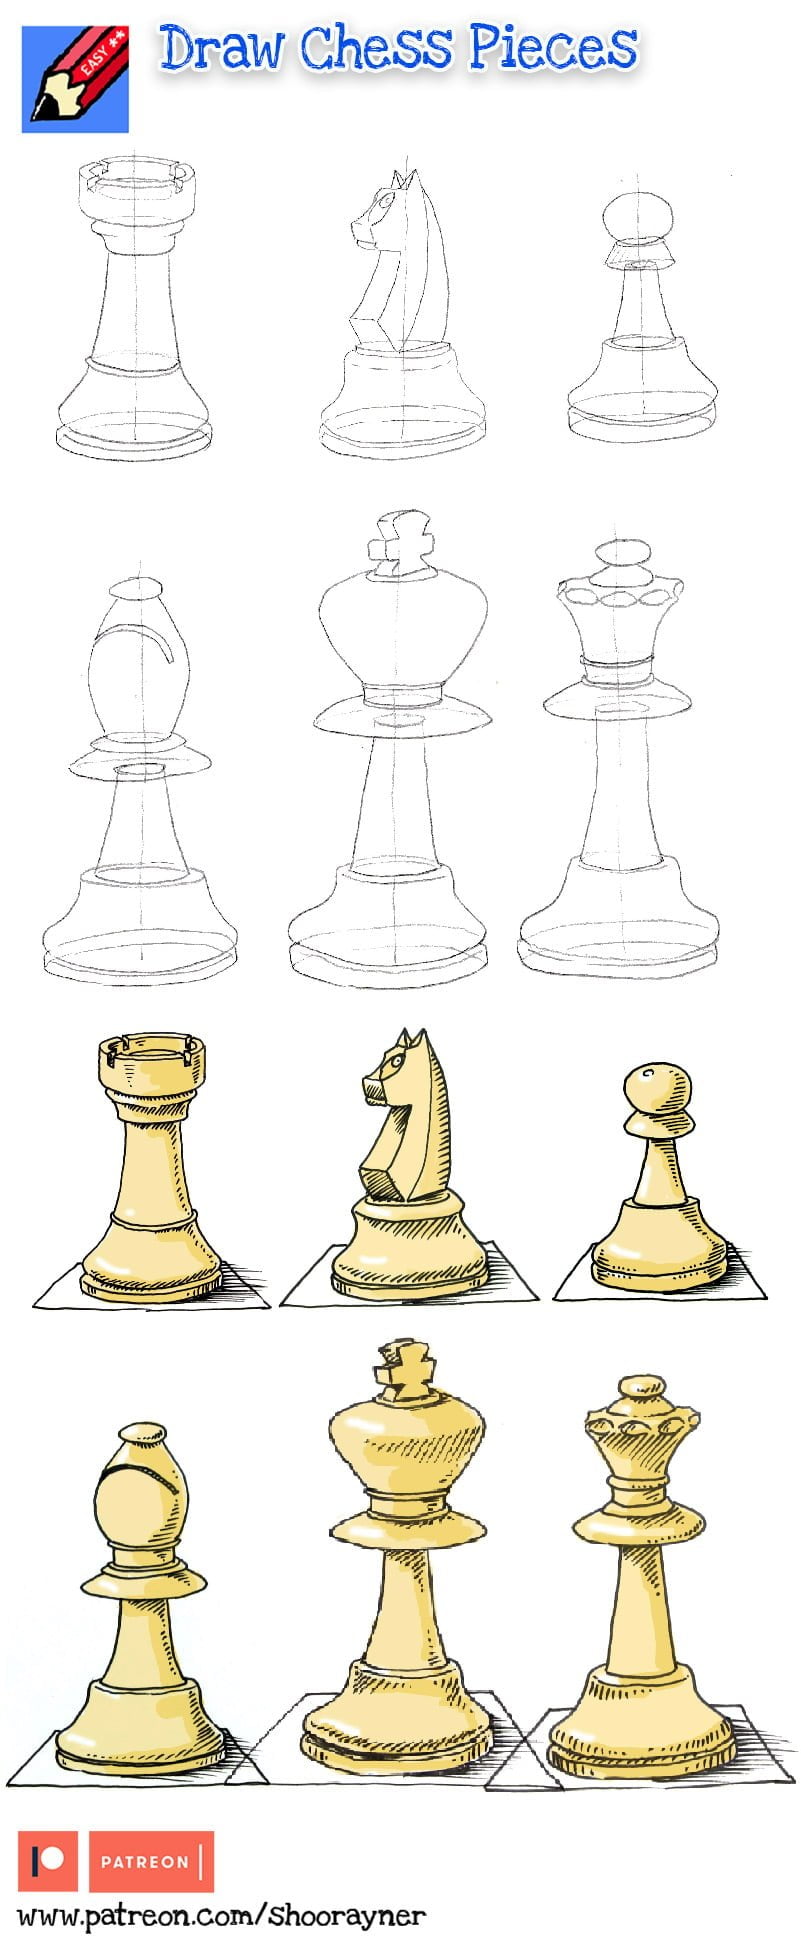 Draw-chess-pieces  Shoo Rayner – Children's Author